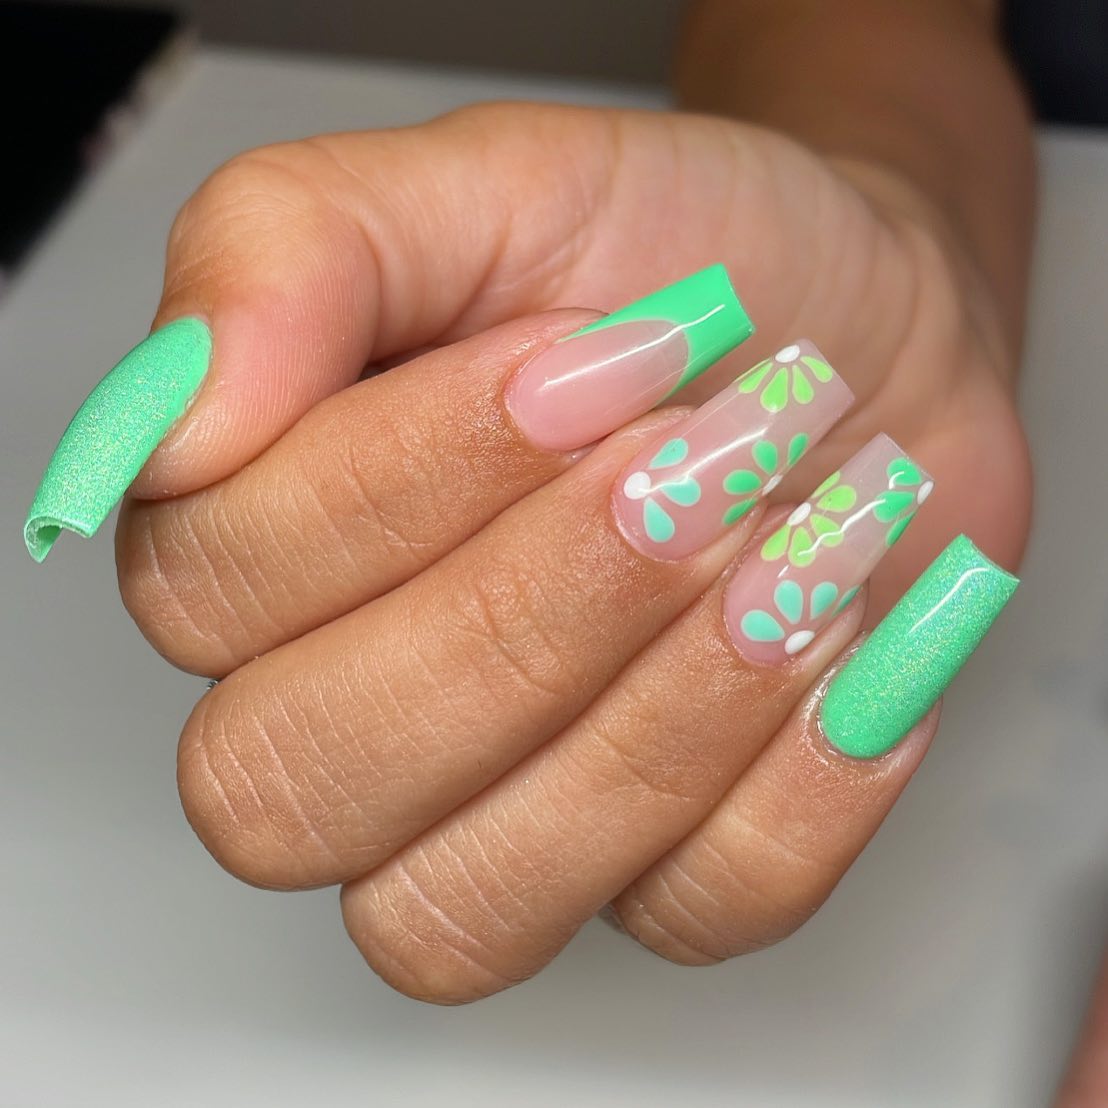 Mint green color is sure to make you look amazing. You can use green tips, shiny green and green flowers at the same time.